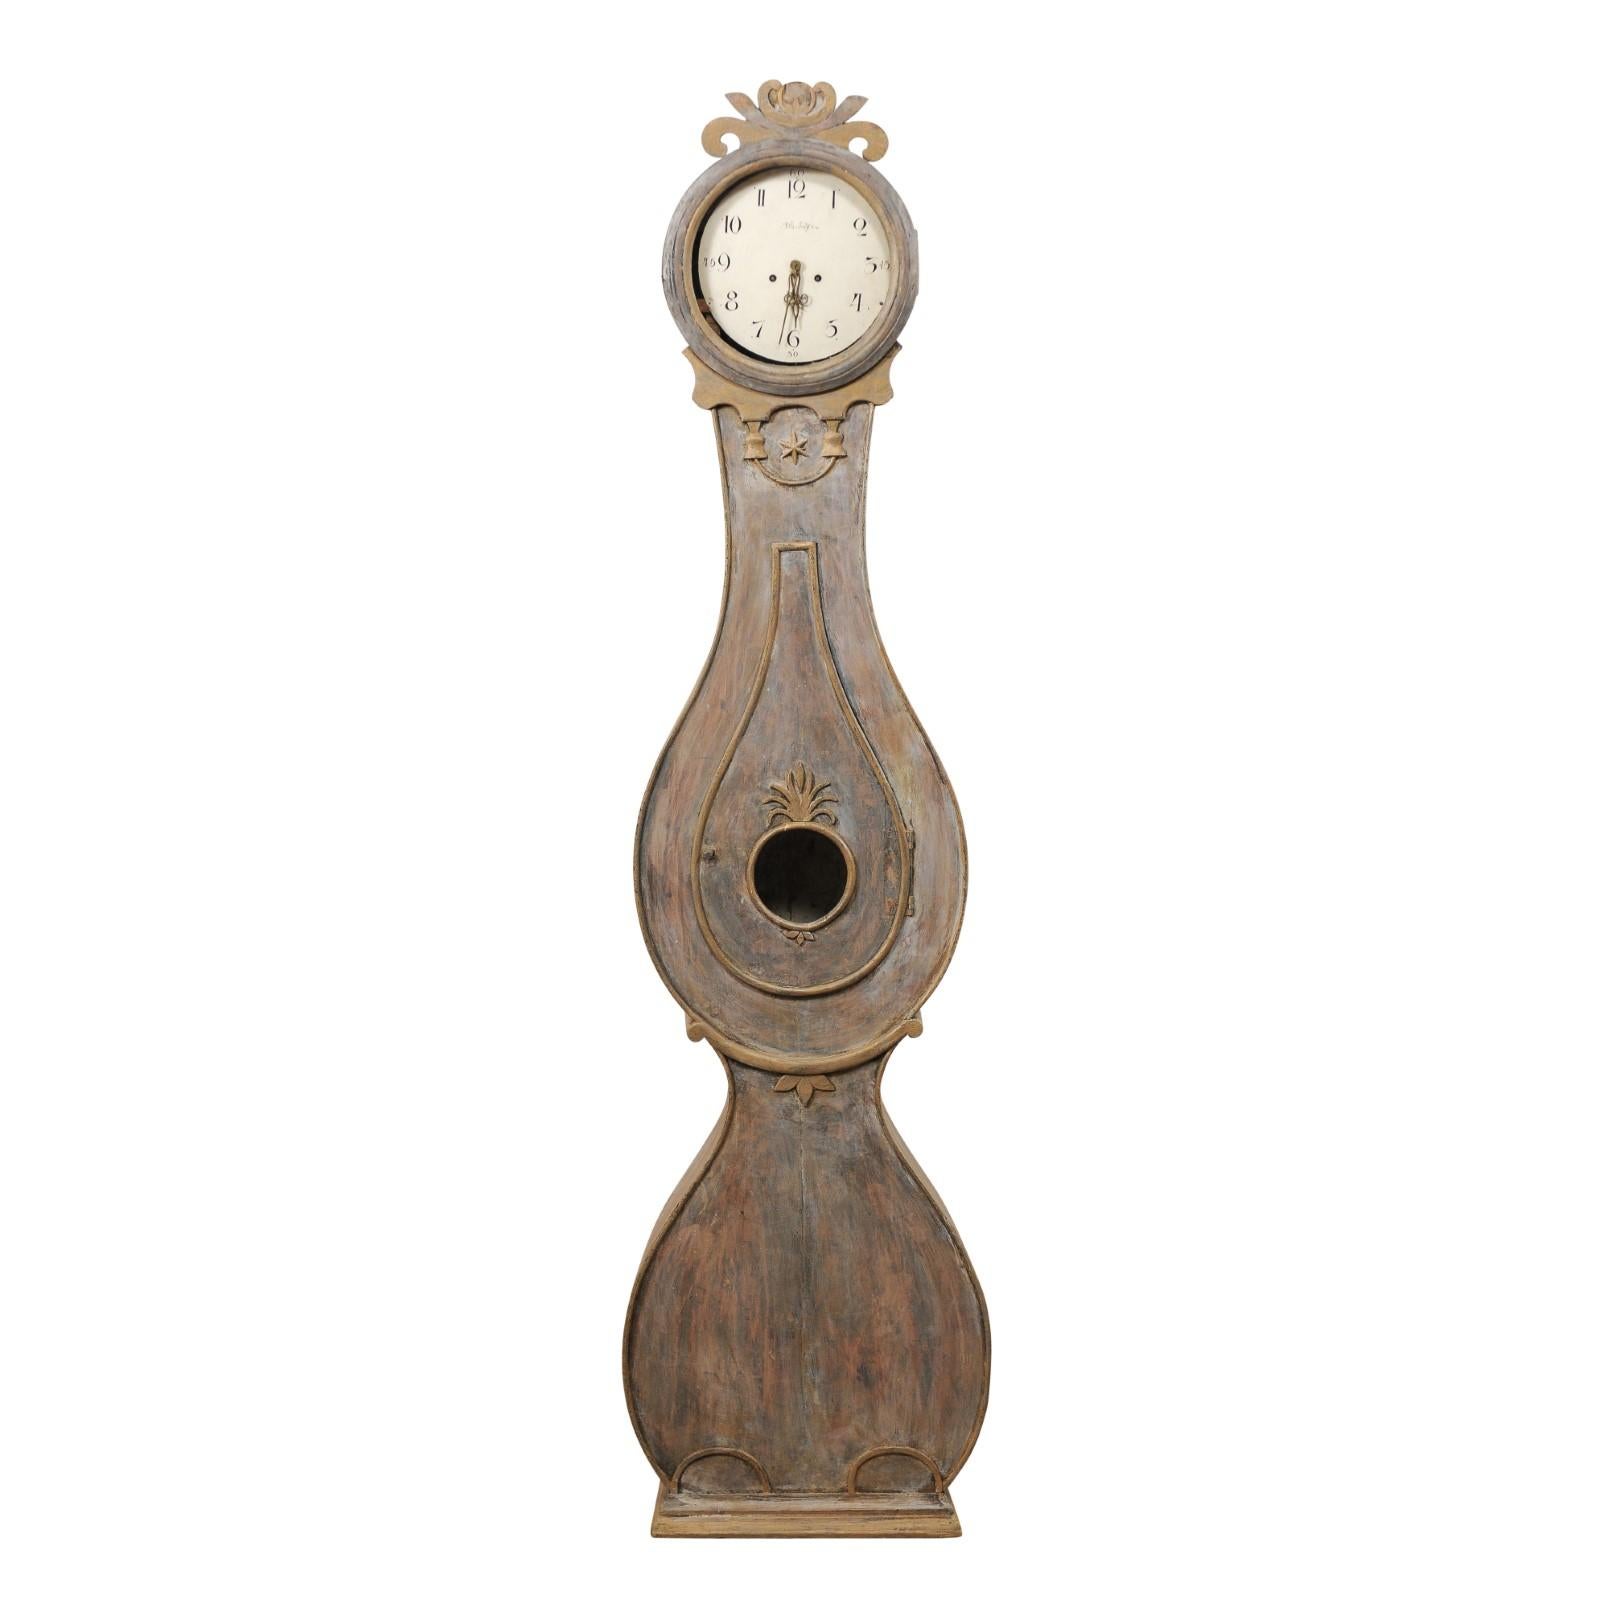 Tall Swedish Fryksdahl Carved and Painted Wood Floor Clock from the 19th Century